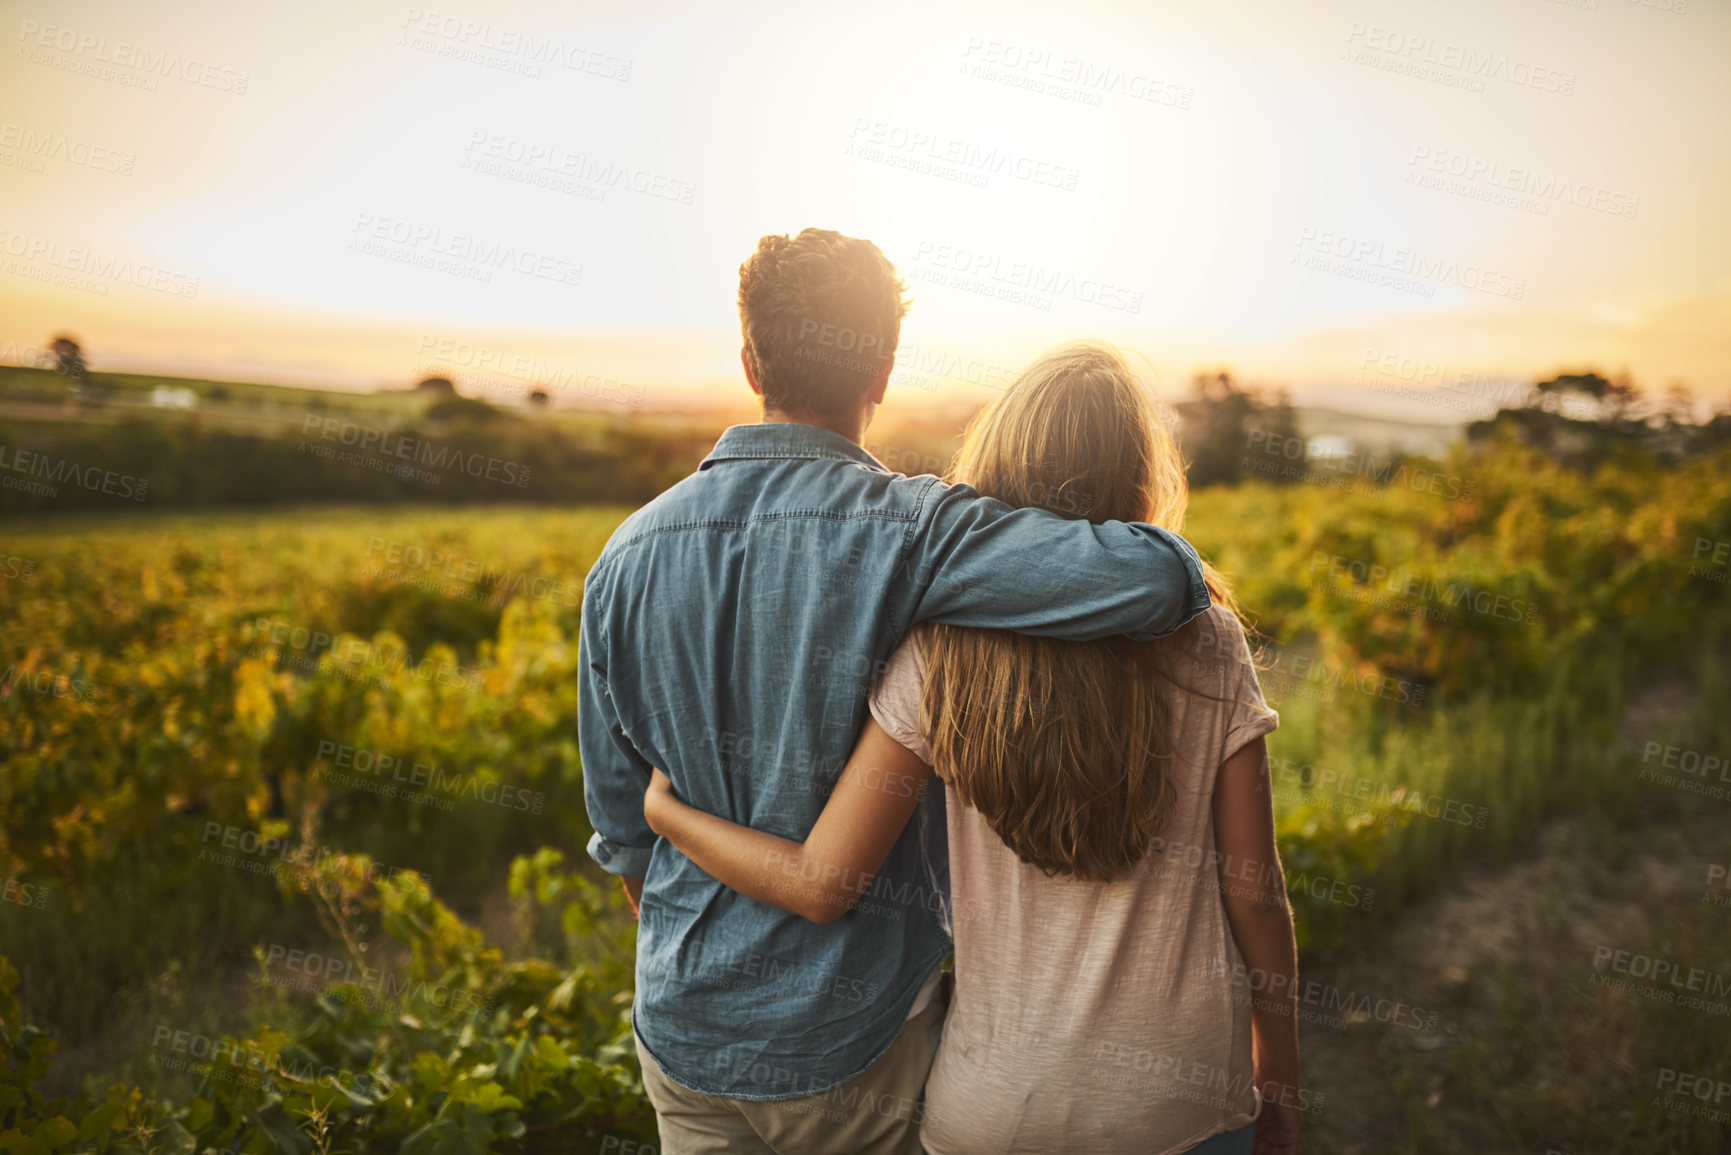 Buy stock photo Shot of a young couple walking through their crops while holding each other and looking into the horizon